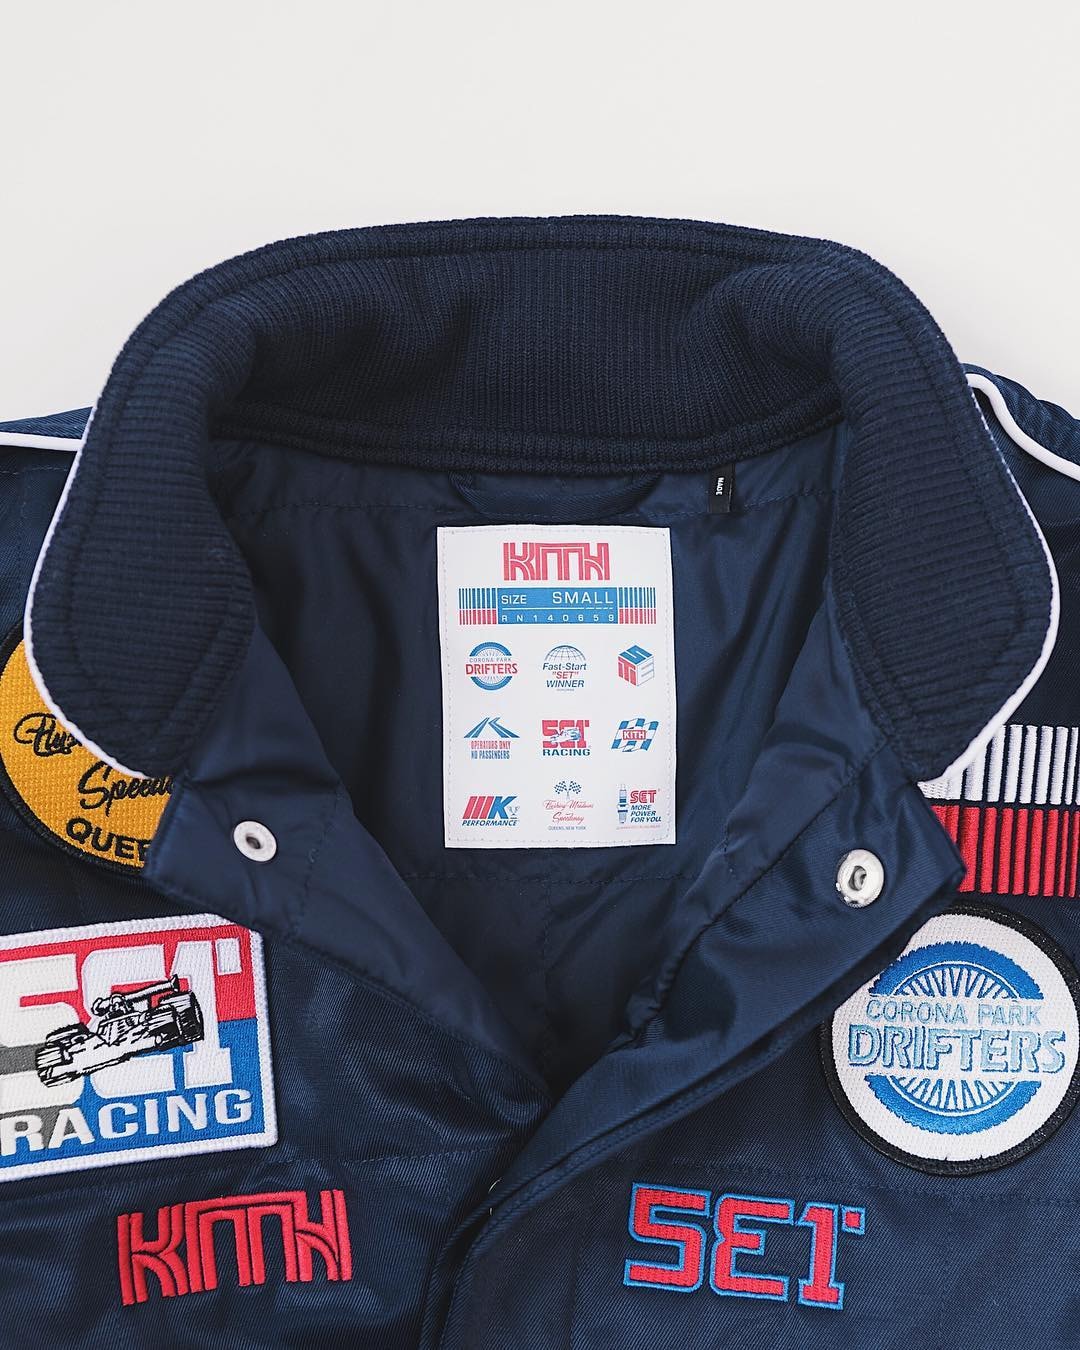 KITH Race Track Inspired Sweatsuit Ronnie Fieg Racing Formula 1 Kith Set Release Details Preview Reveal Buy